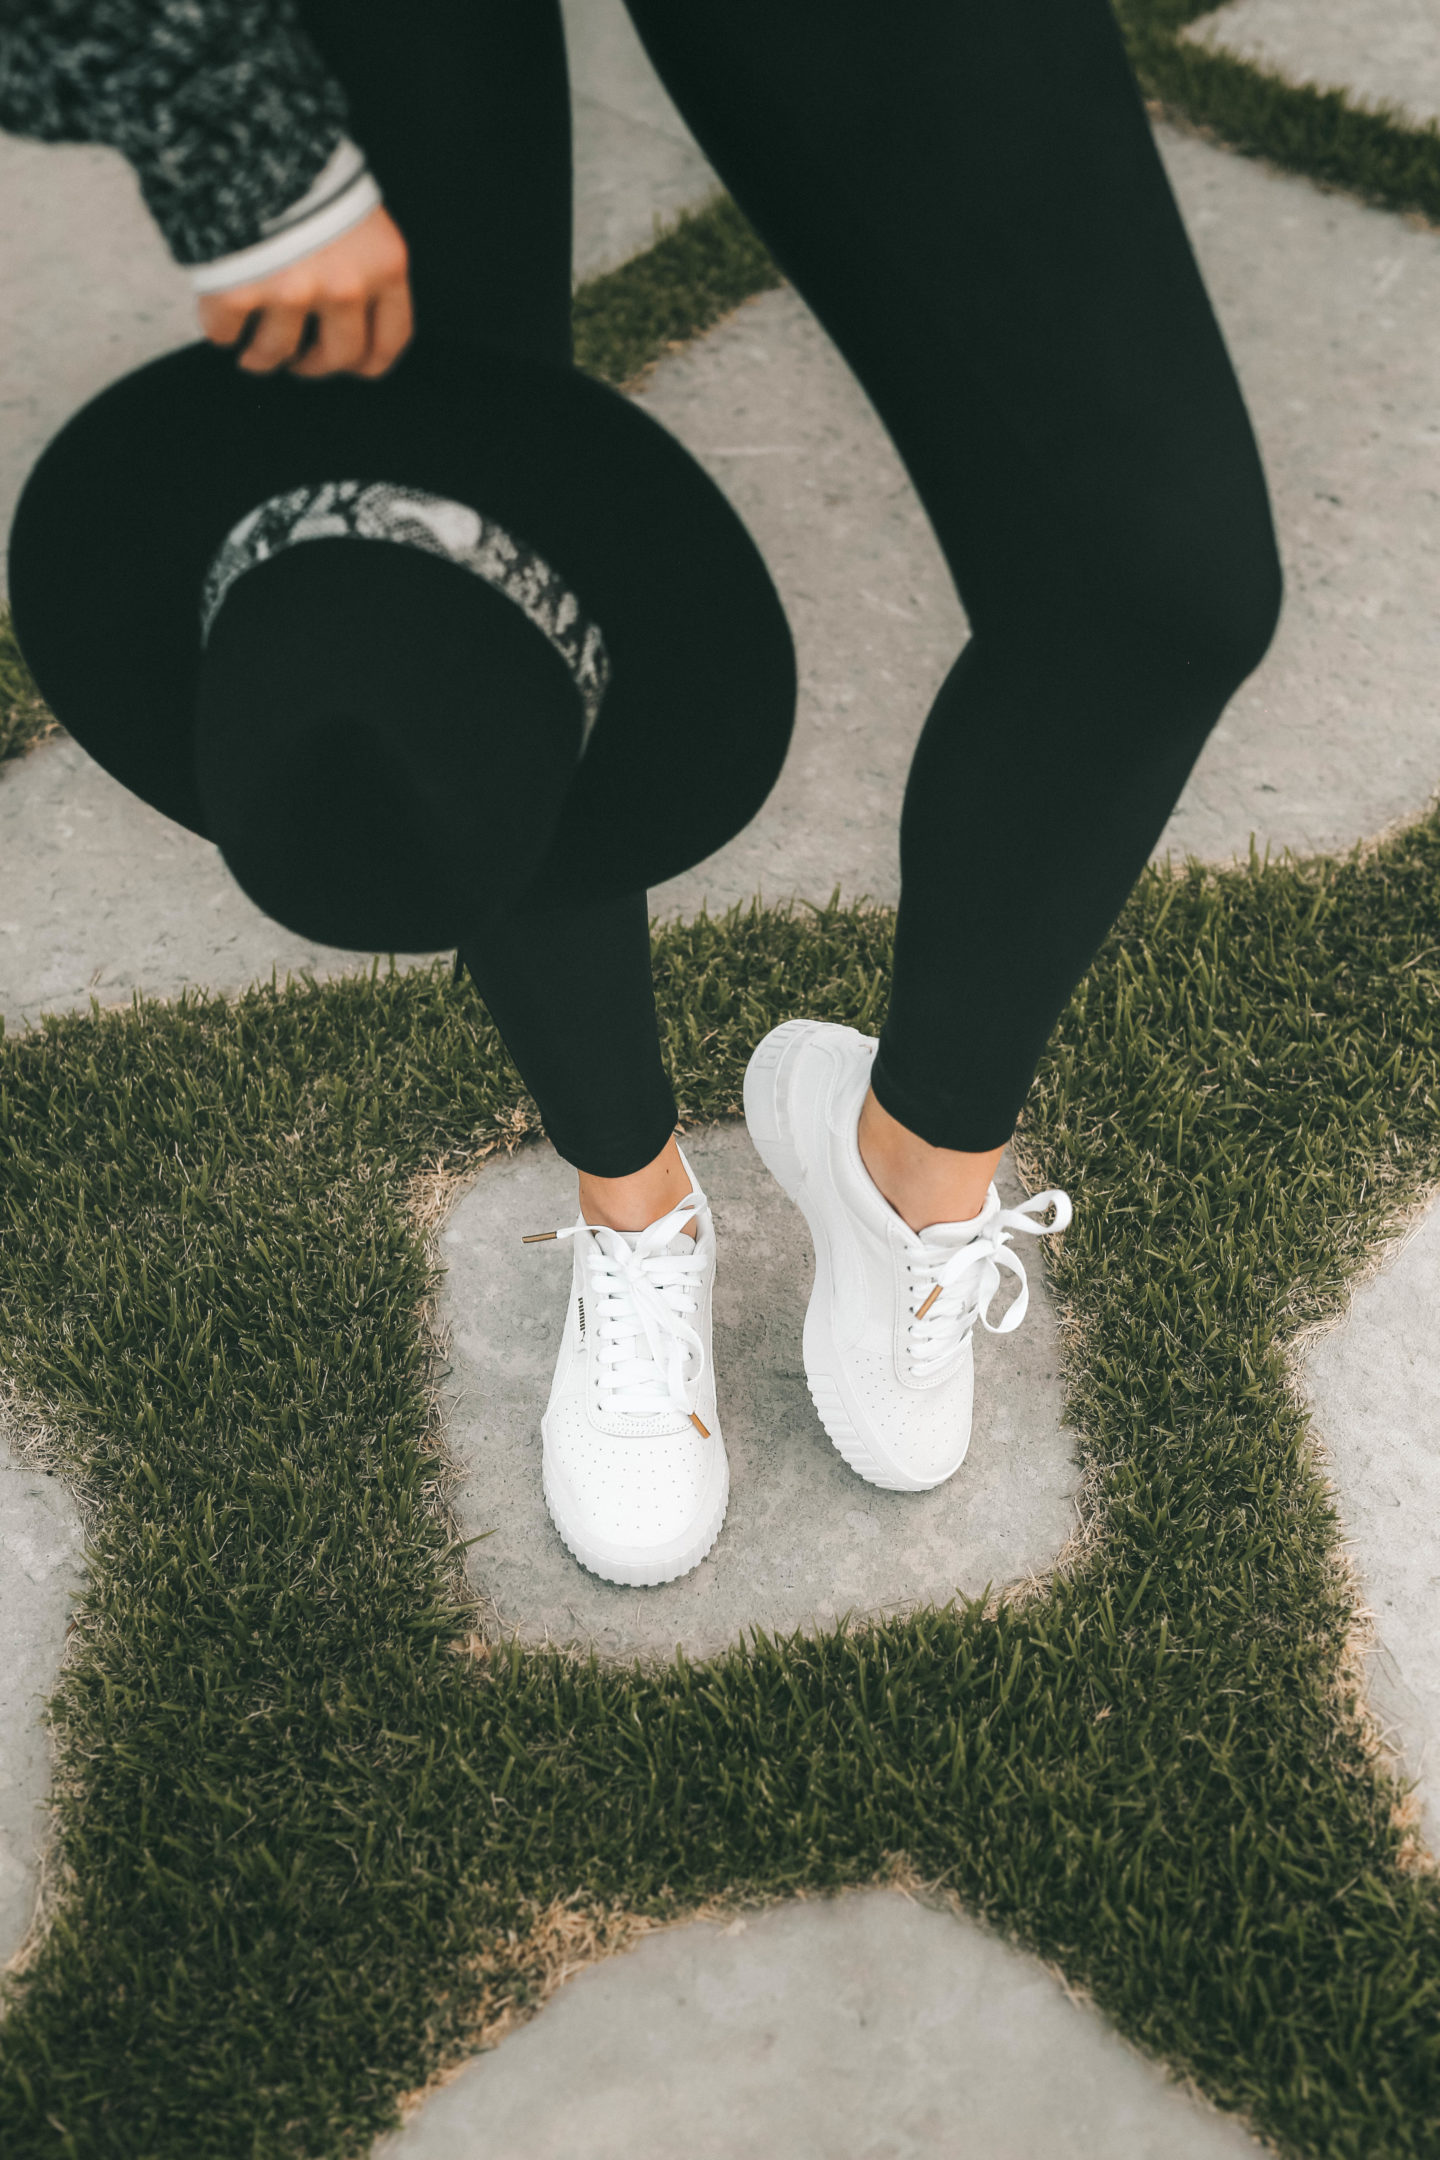 How to Wear White Sneakers by popular fashion blog, Dressed to Kill: image of a woman wearing a TopShop black and white sweater, black felt hat, black leggings, and white Puma sneakers.